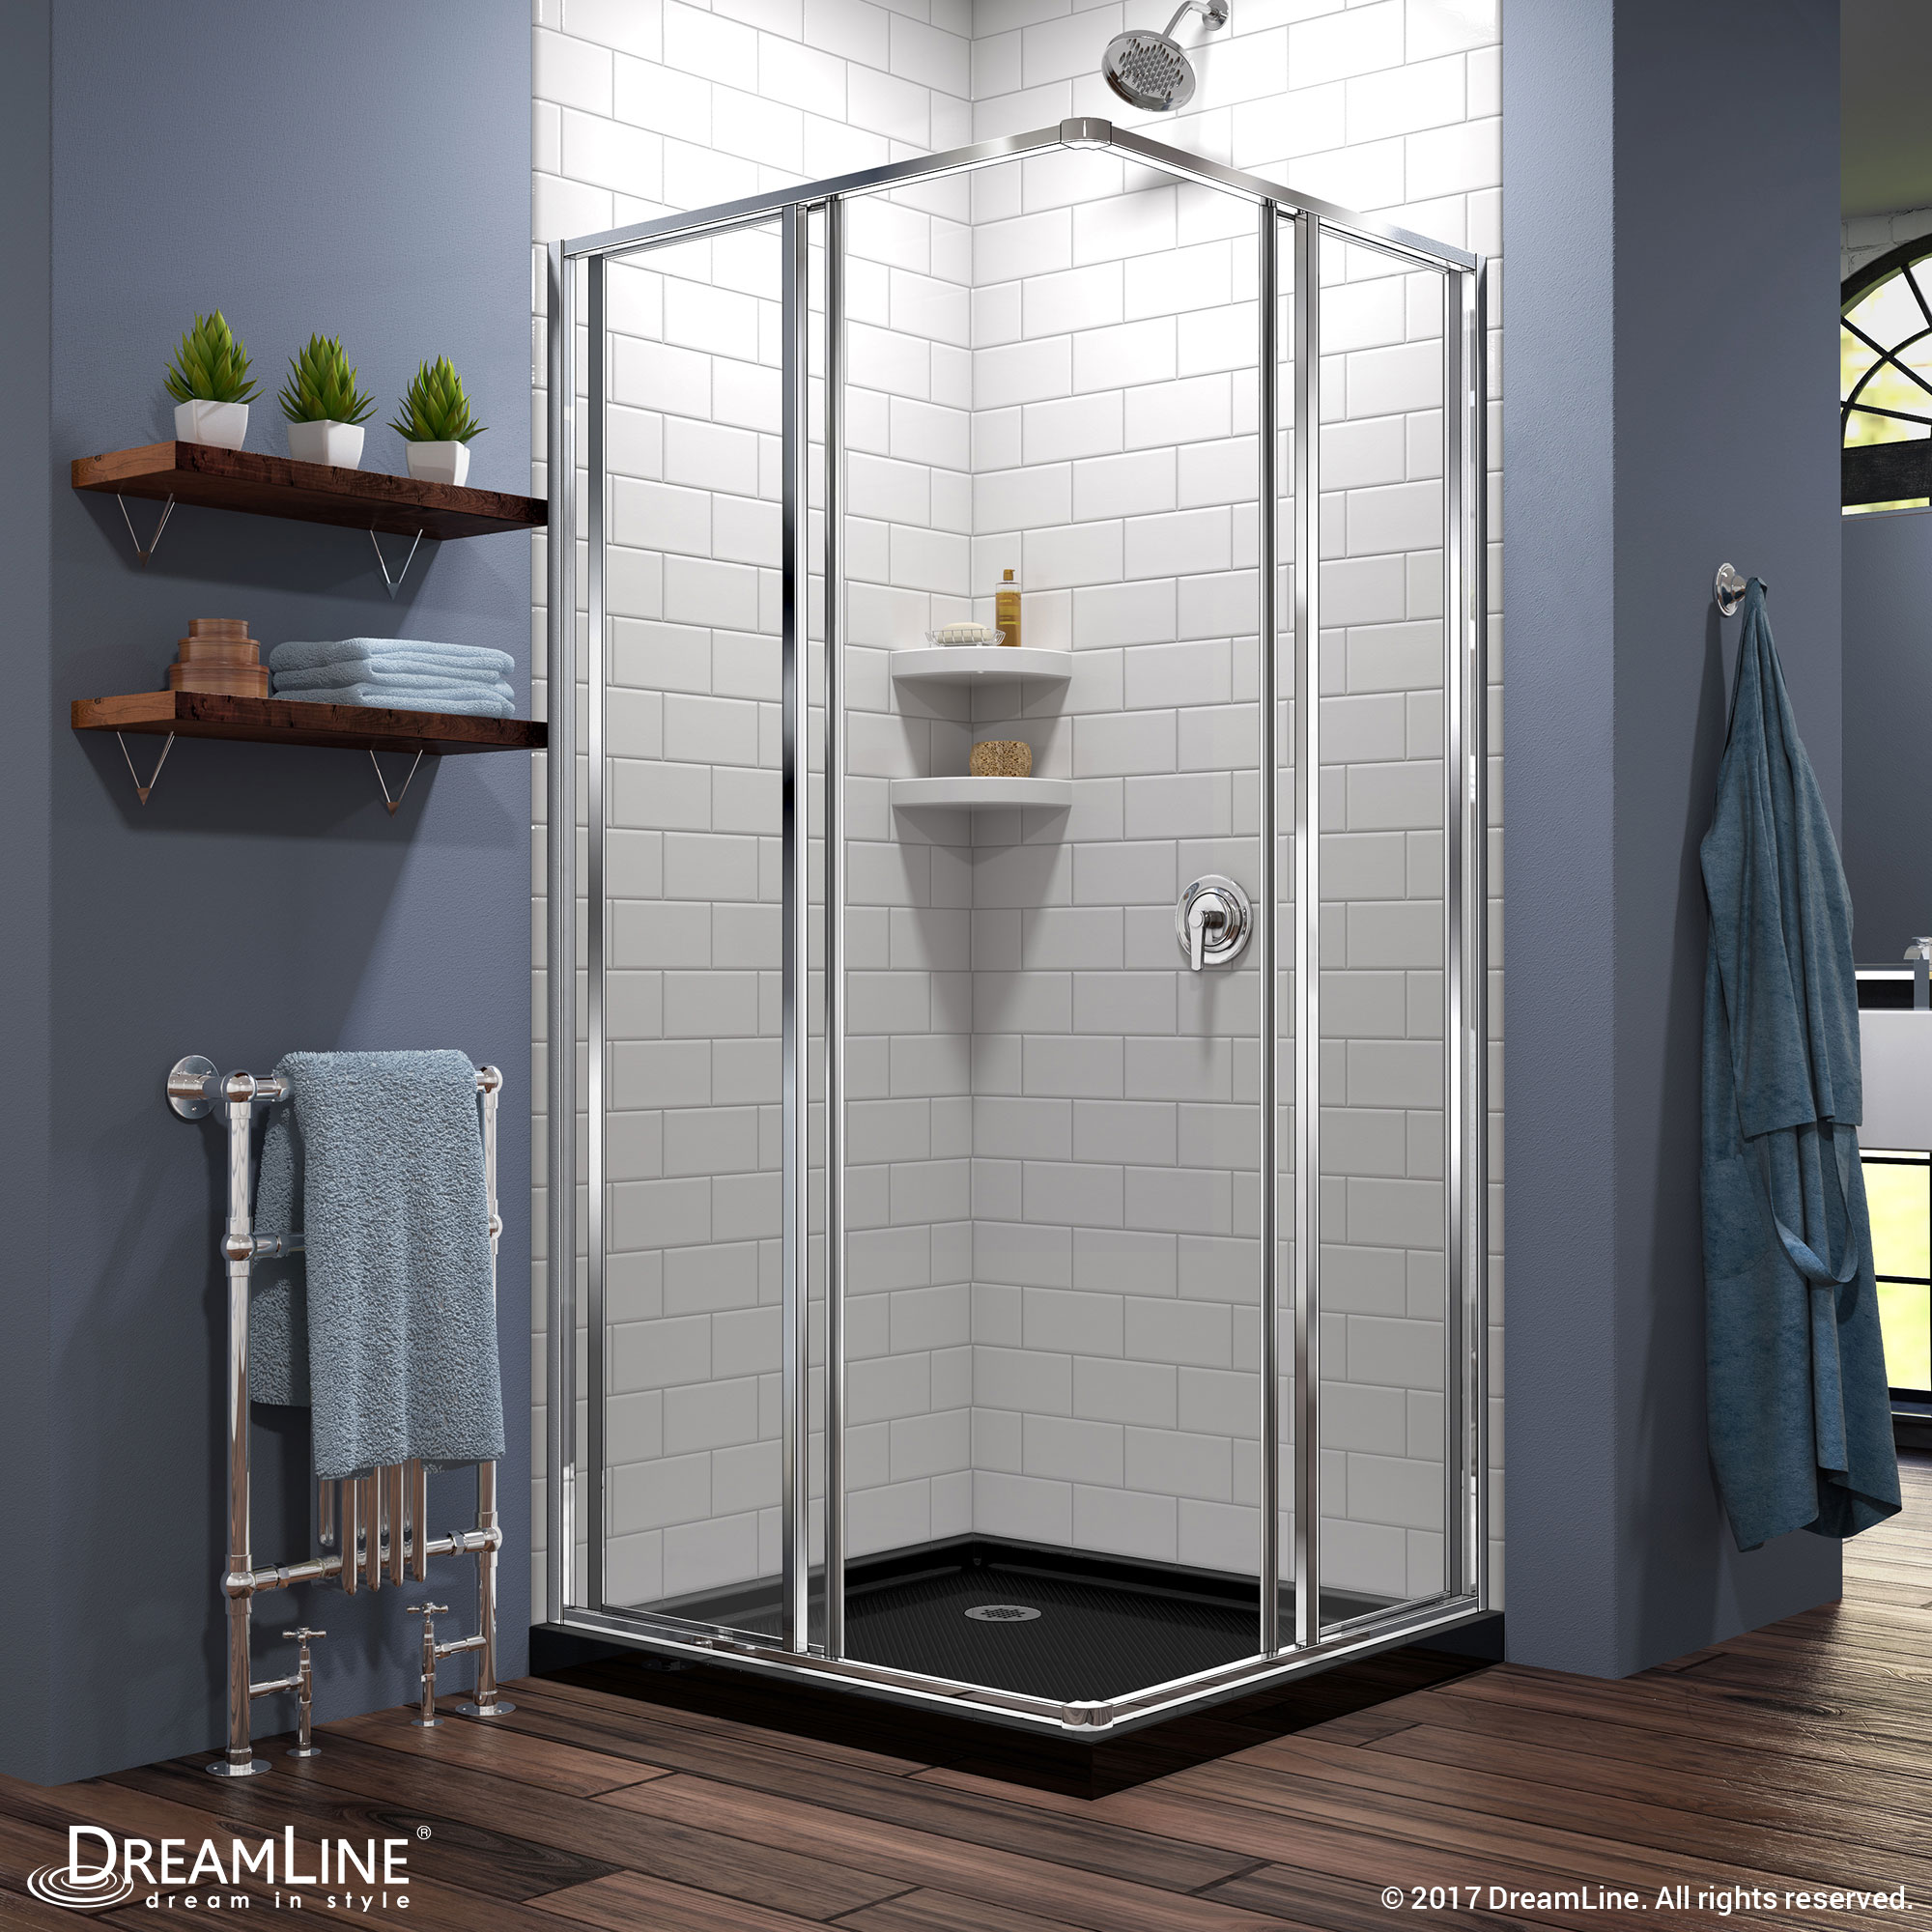 DreamLine Cornerview 36 in. D x 36 in. W x 74 3/4 in. H Sliding Shower Enclosure in Chrome with Black Acrylic Base Kit